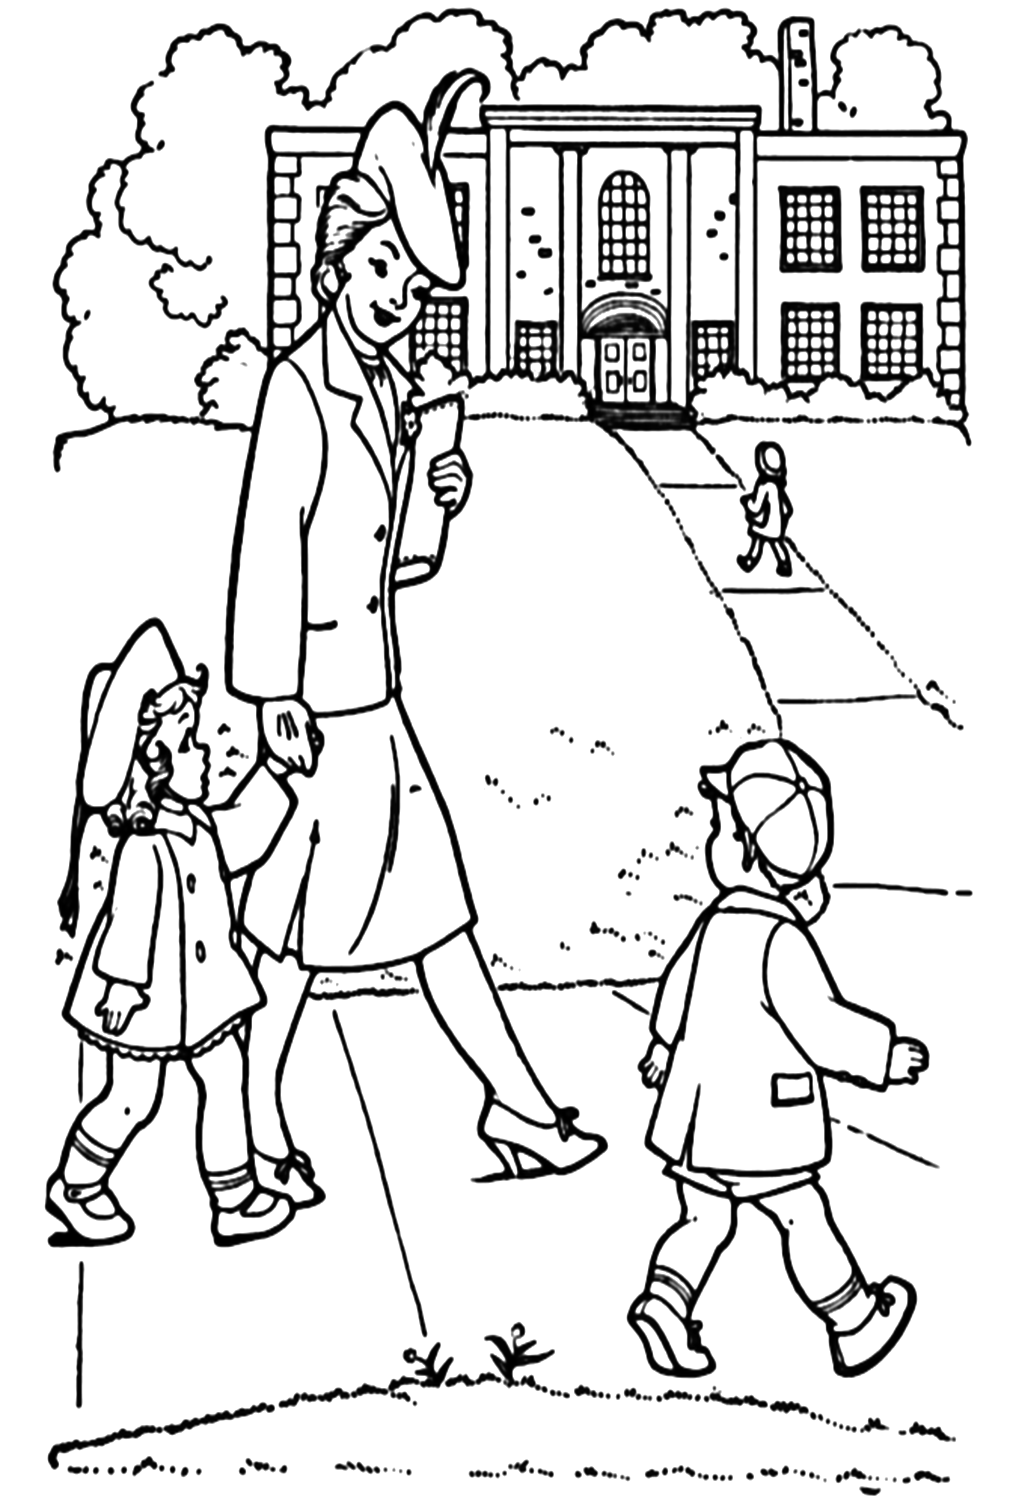 Mother And Kids On First Day Of School Coloring Page from First Day Of School